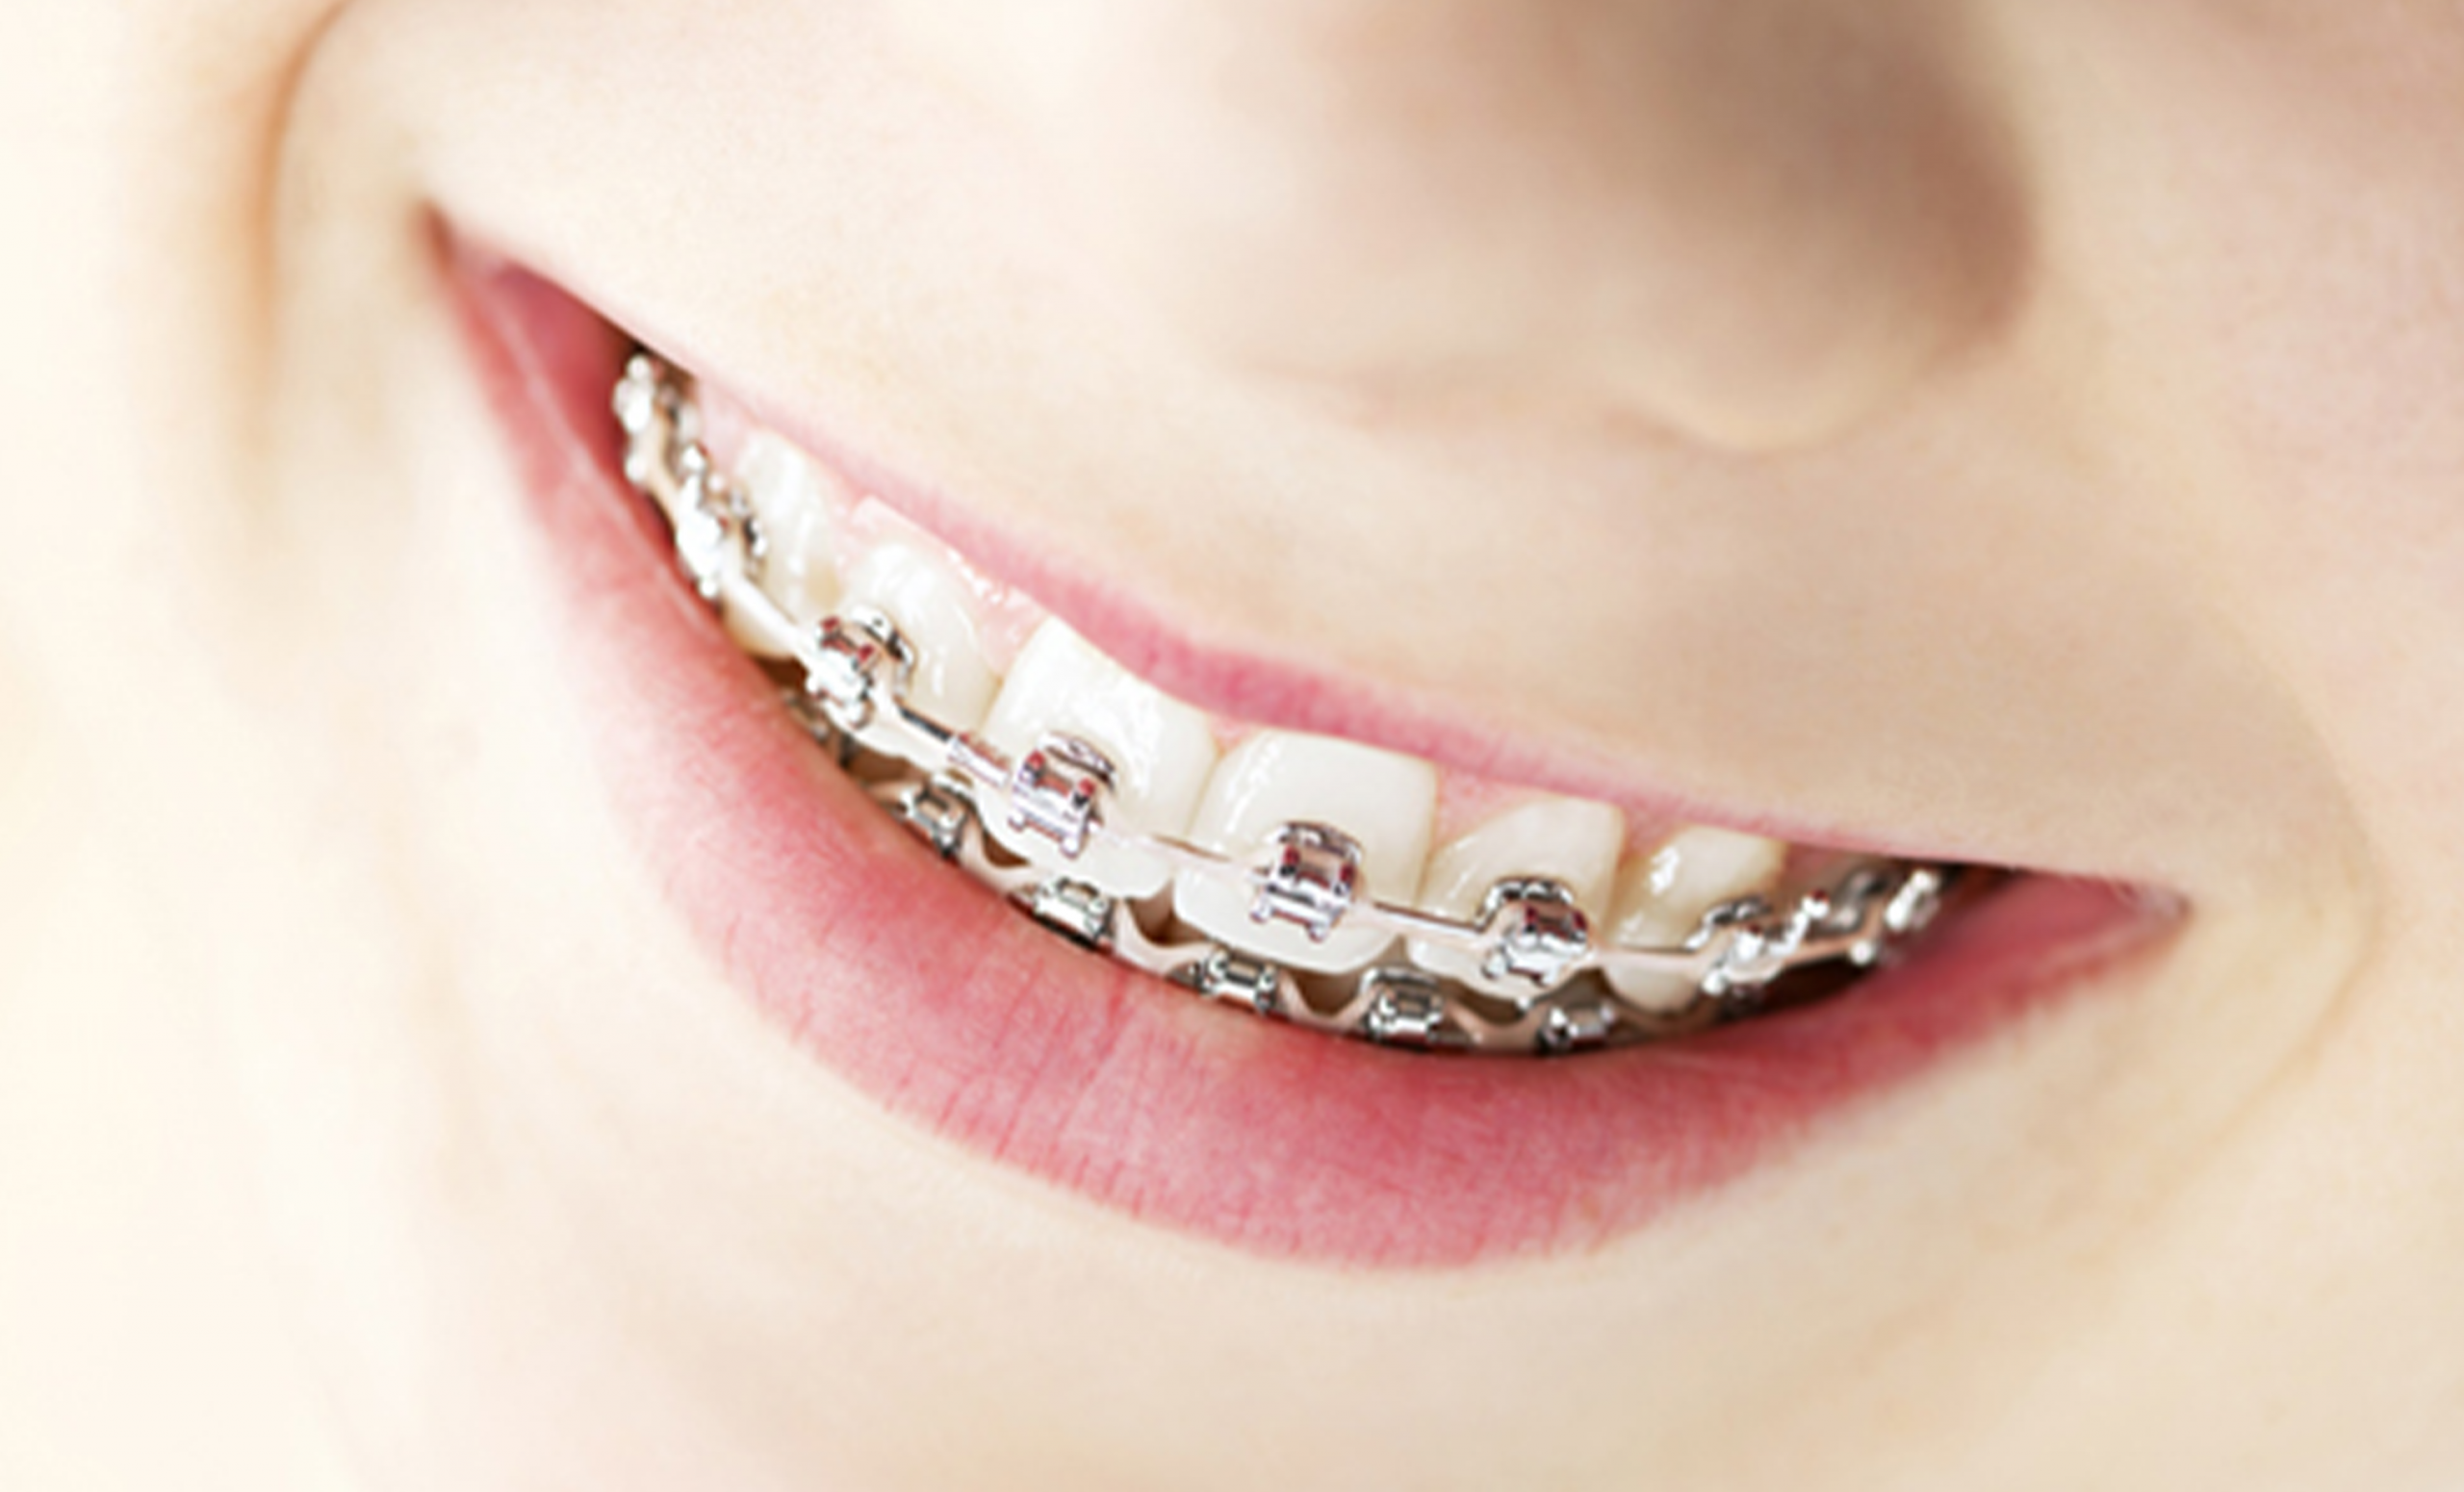 Is orthodontic treatment just for straightening teeth?